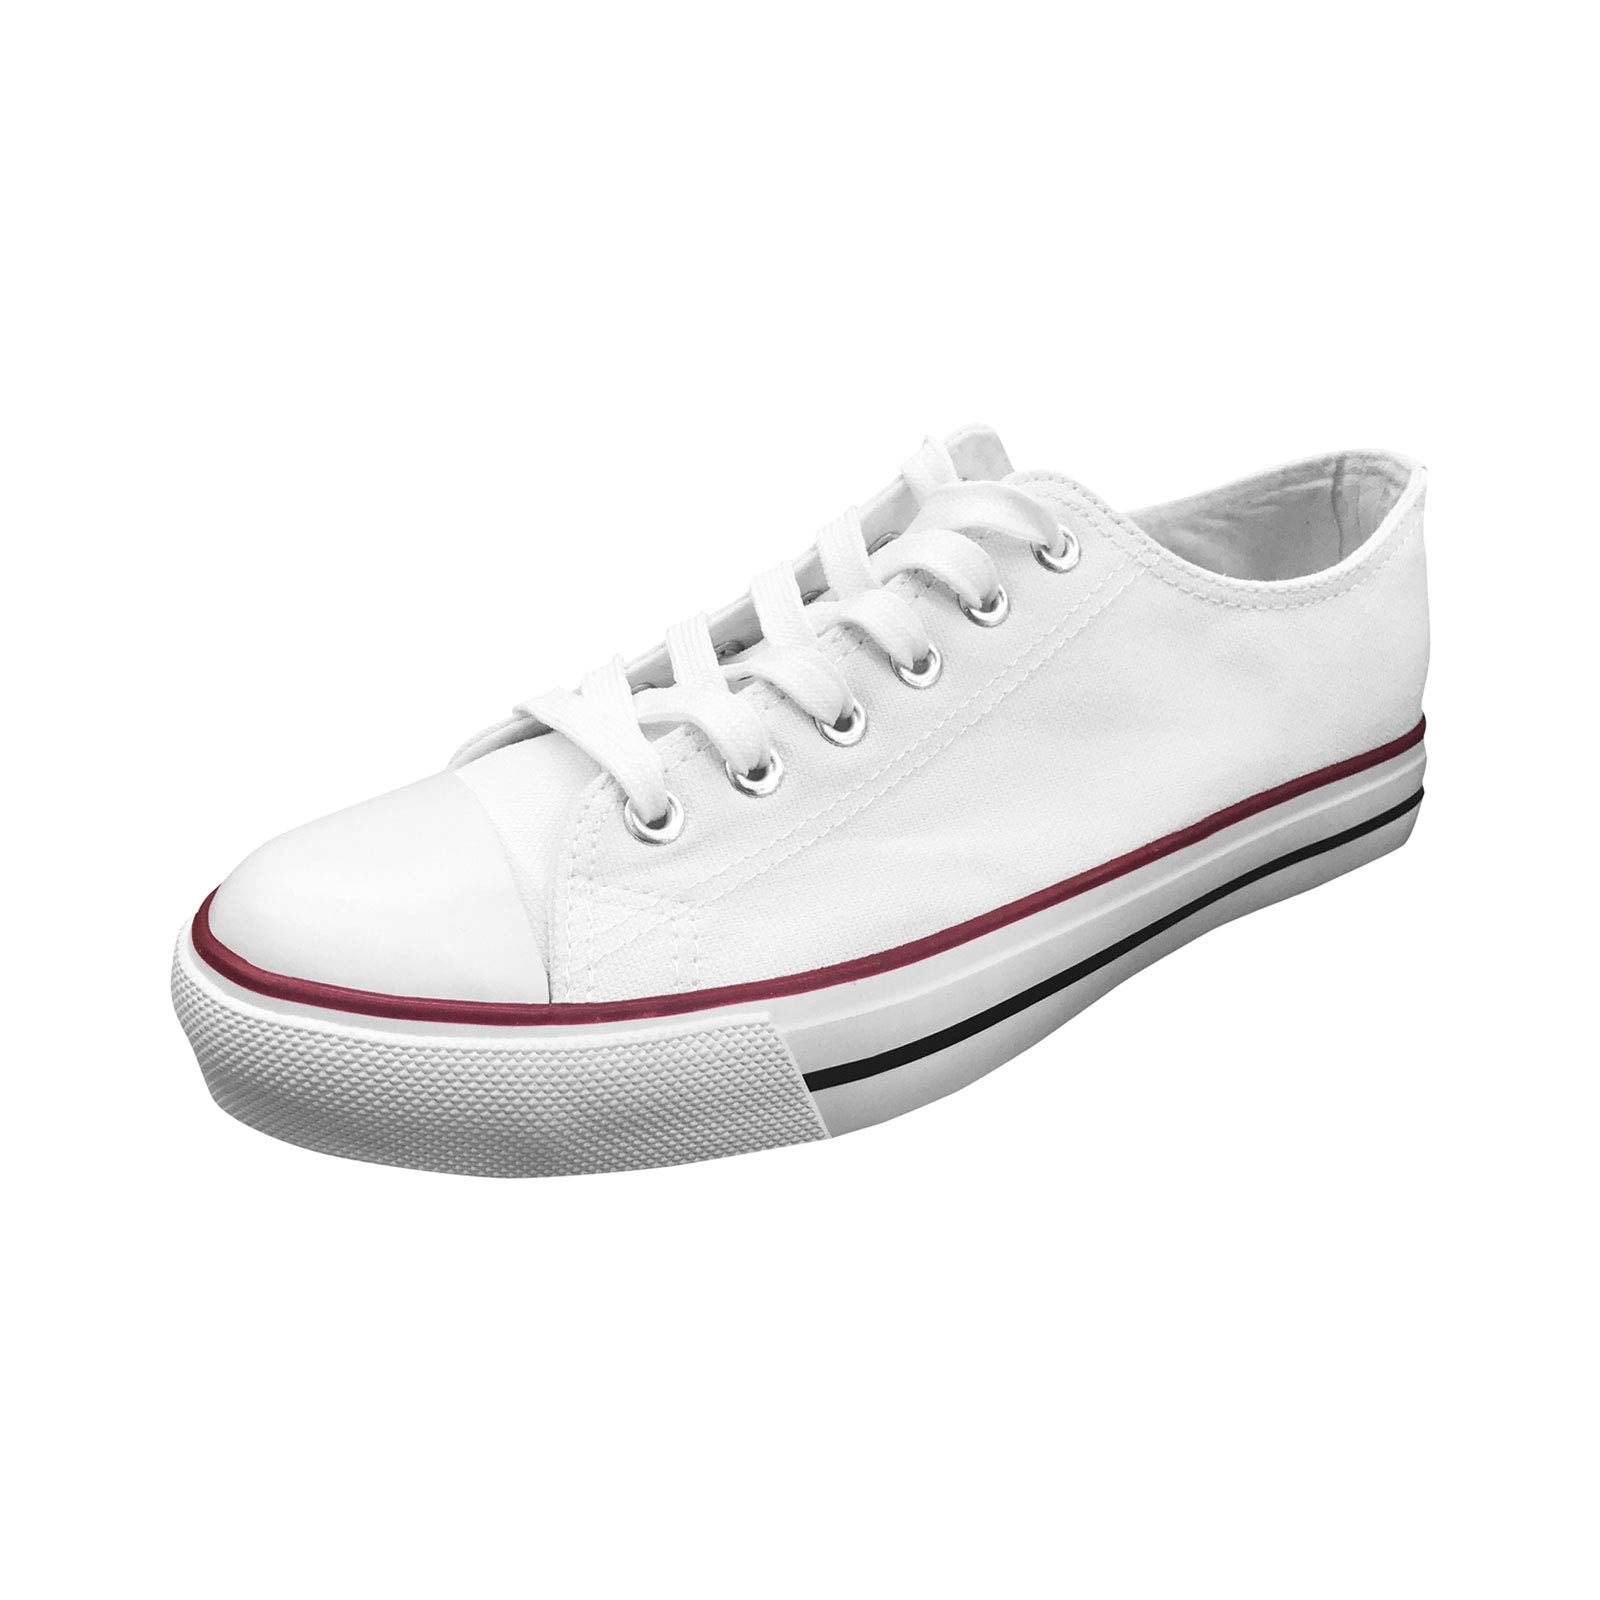 Ish Original Official Men Blank Low Top Rubber Sole Casual, White, Size 10.0 - Opticdeals